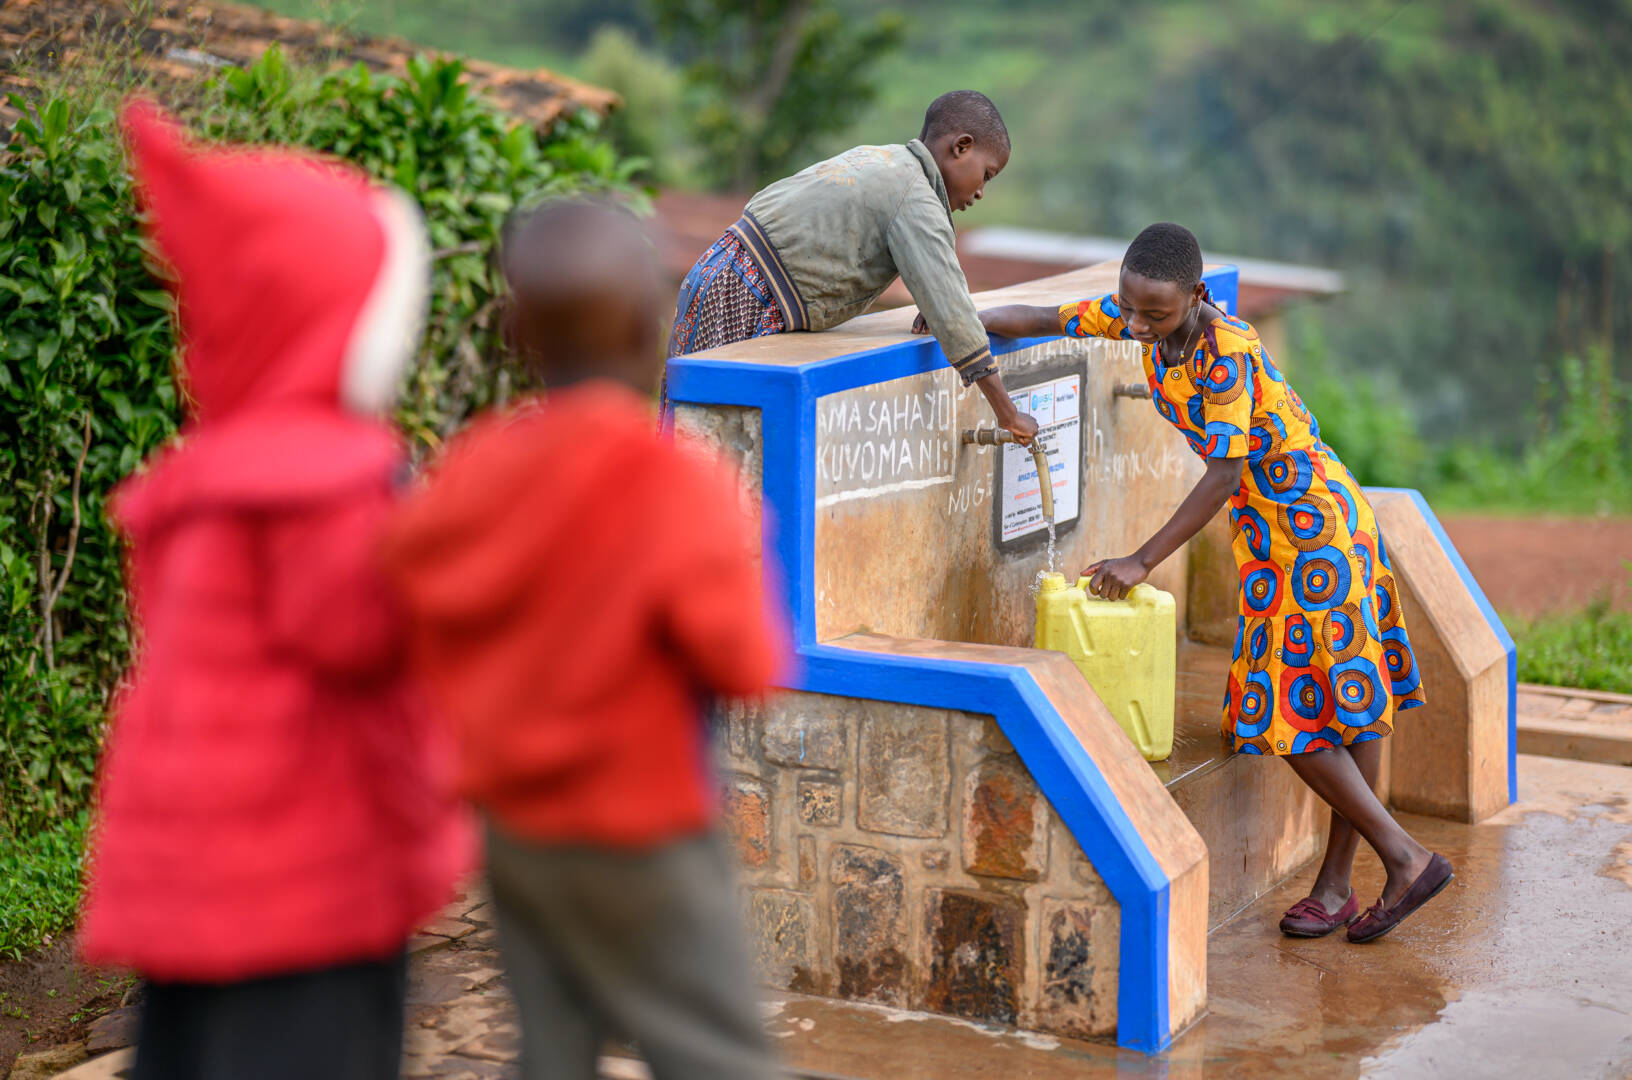 A Rwandan girl in a bright orange and blue dress fills her yellow jerrycan with water at a tap. She is helped by another girl leaning over the top.